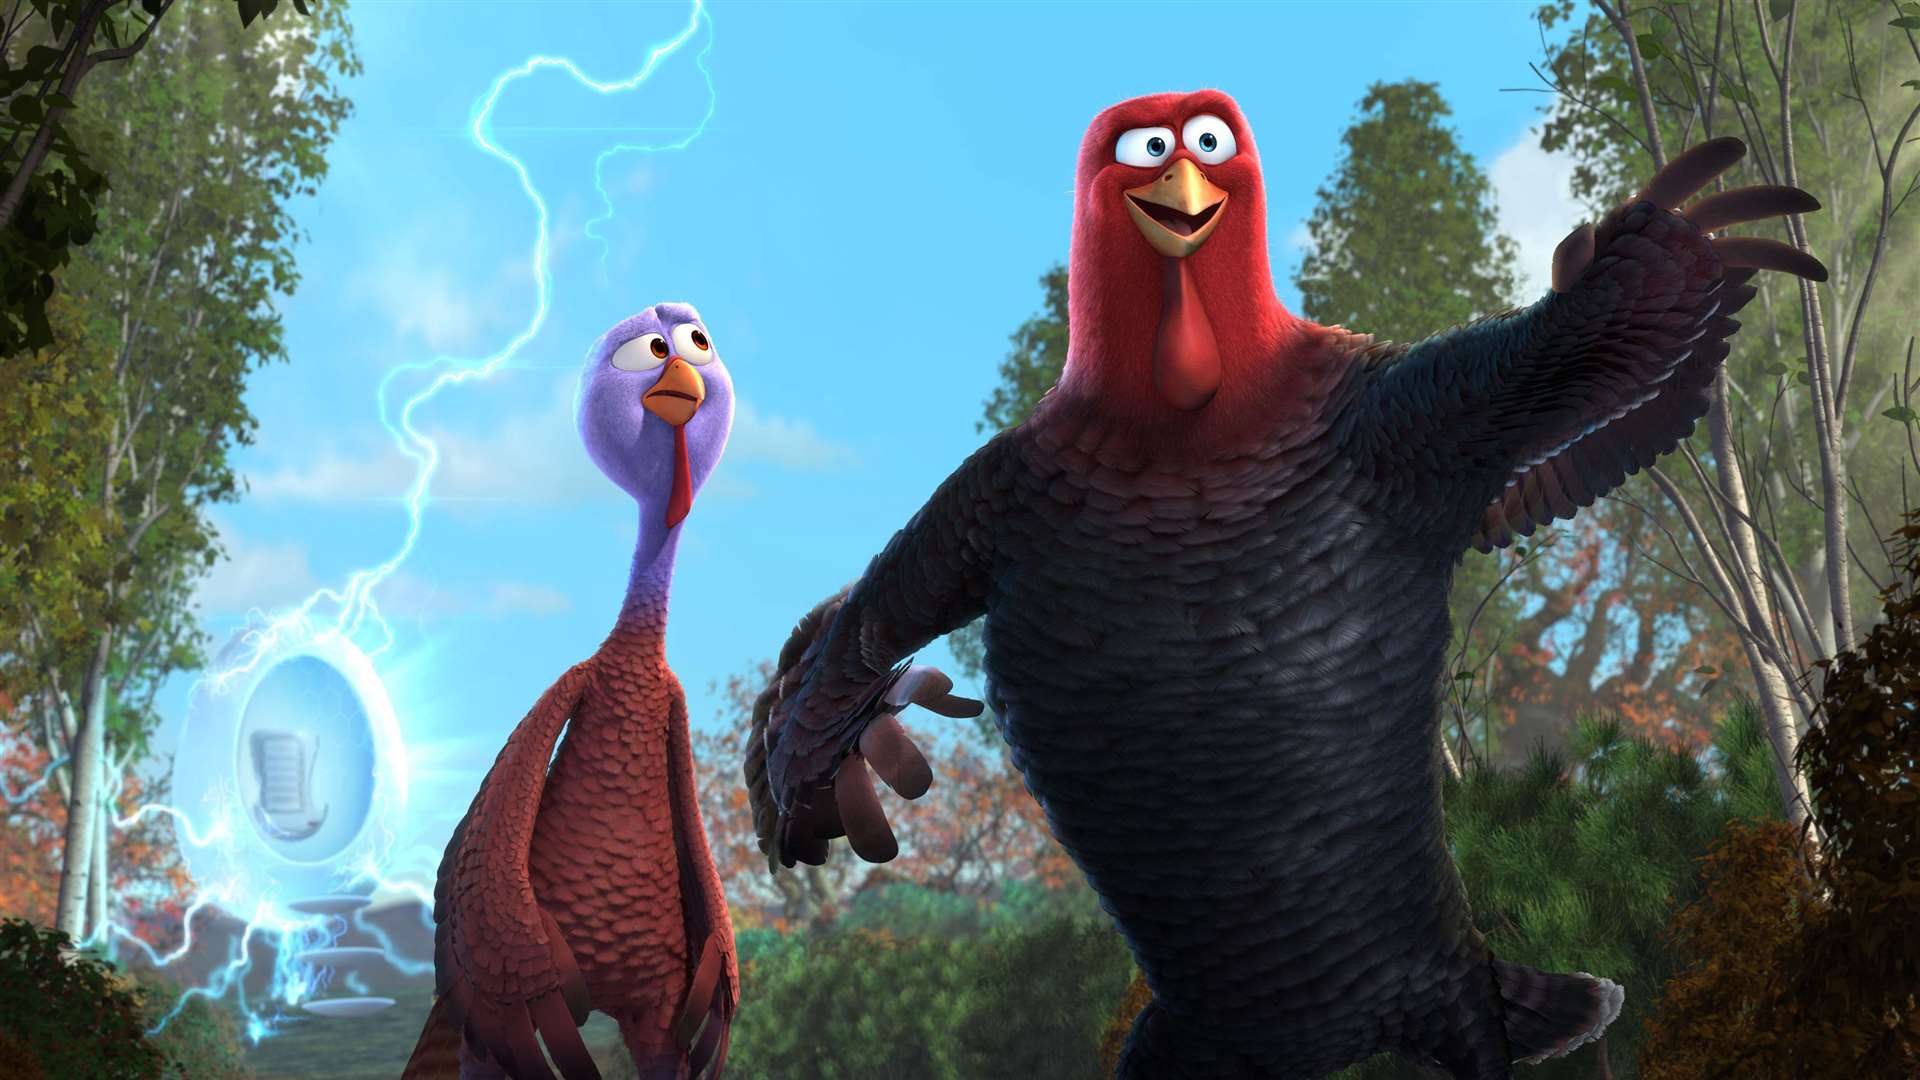 Free Birds, Reggie (voiced by Owen Wilson) and Jake (voiced by Woody Harrelson). Picture: PA Photo/Entertainment One